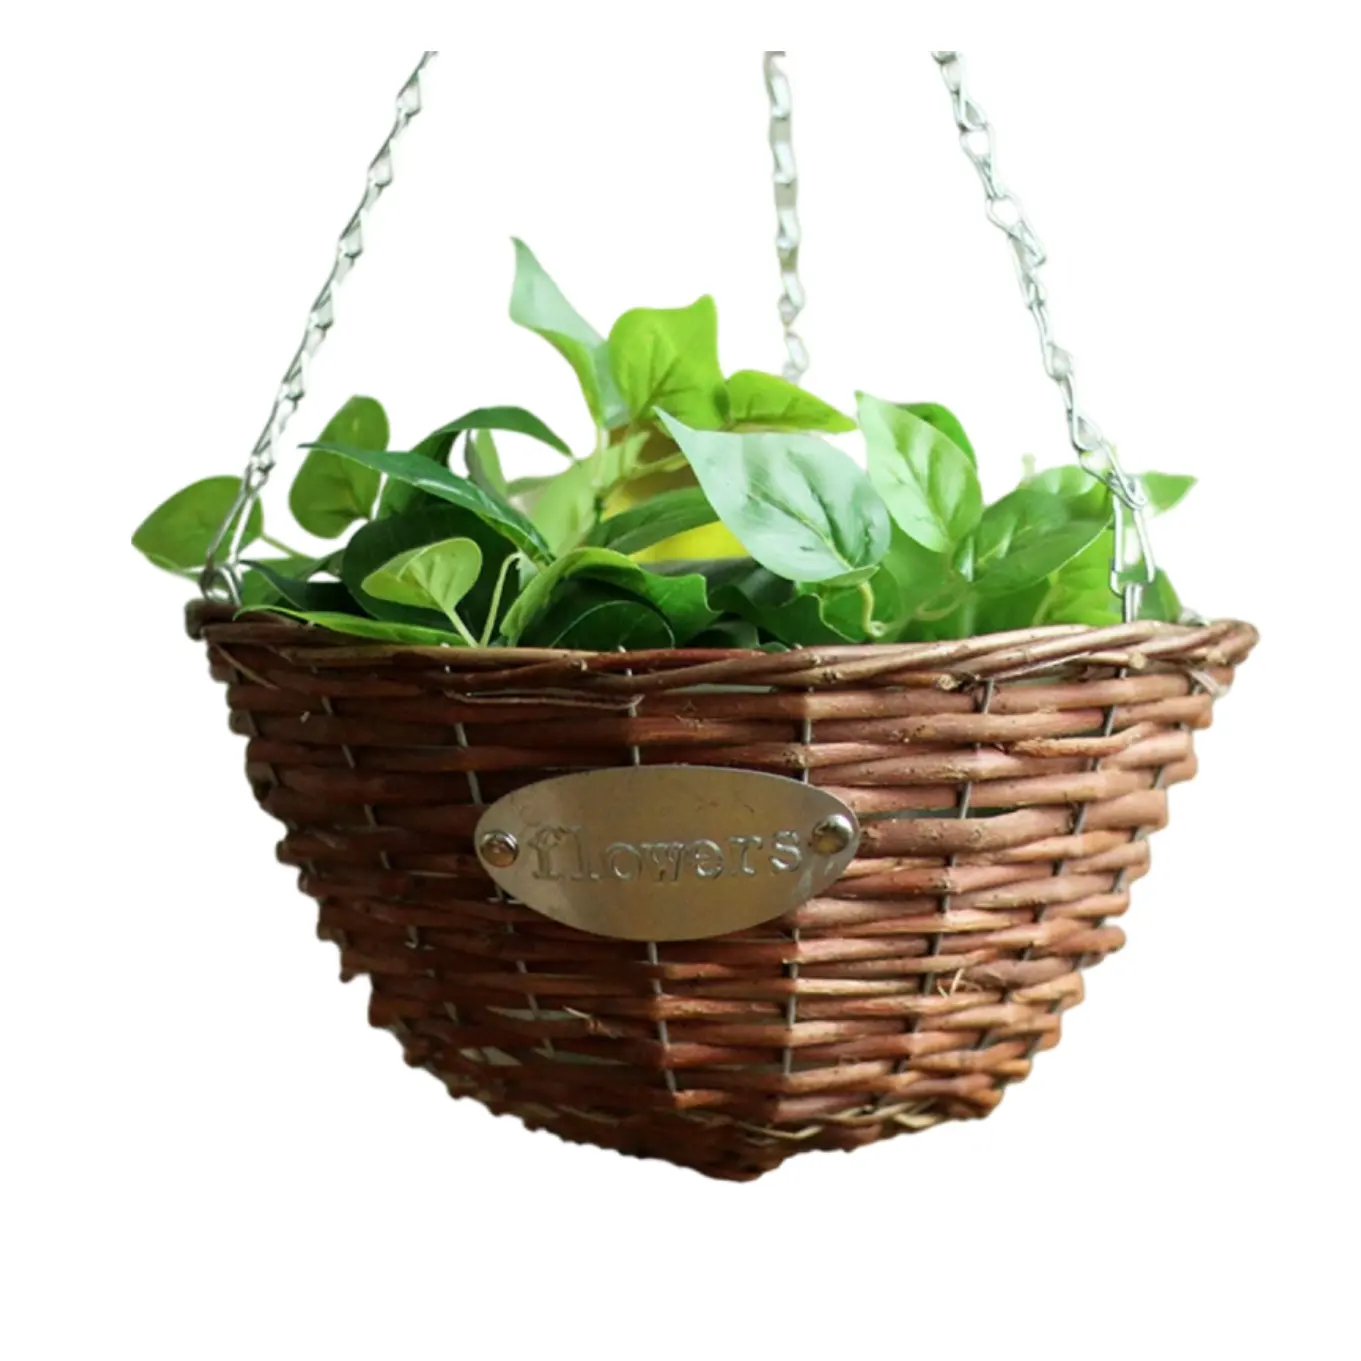 Large Hanging Planter Natural Wicker Hanging Flower Baskets with Waterproof Plastic Liner for Home Outdoor Garden Decor